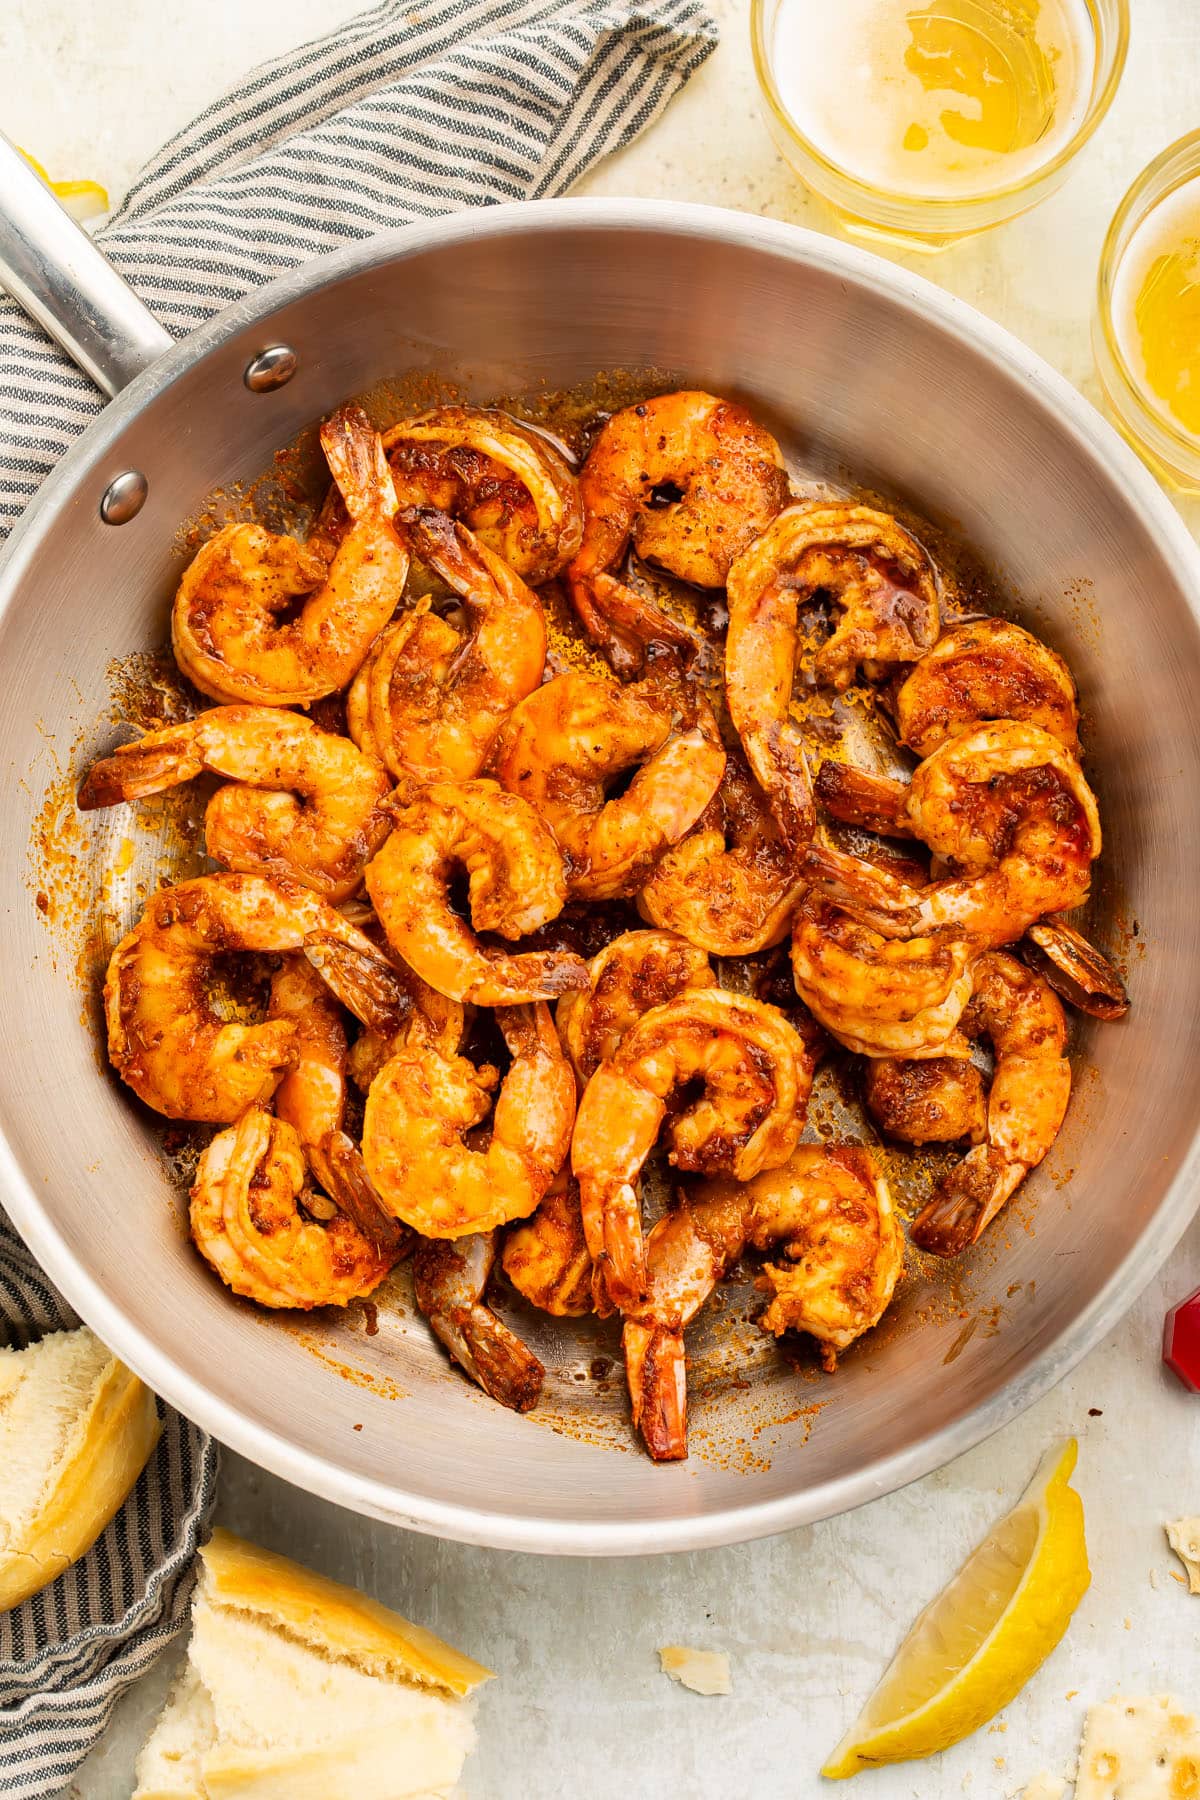 Overhead photo of a large silver skillet full of a tender, slightly curled Cajun shrimp.